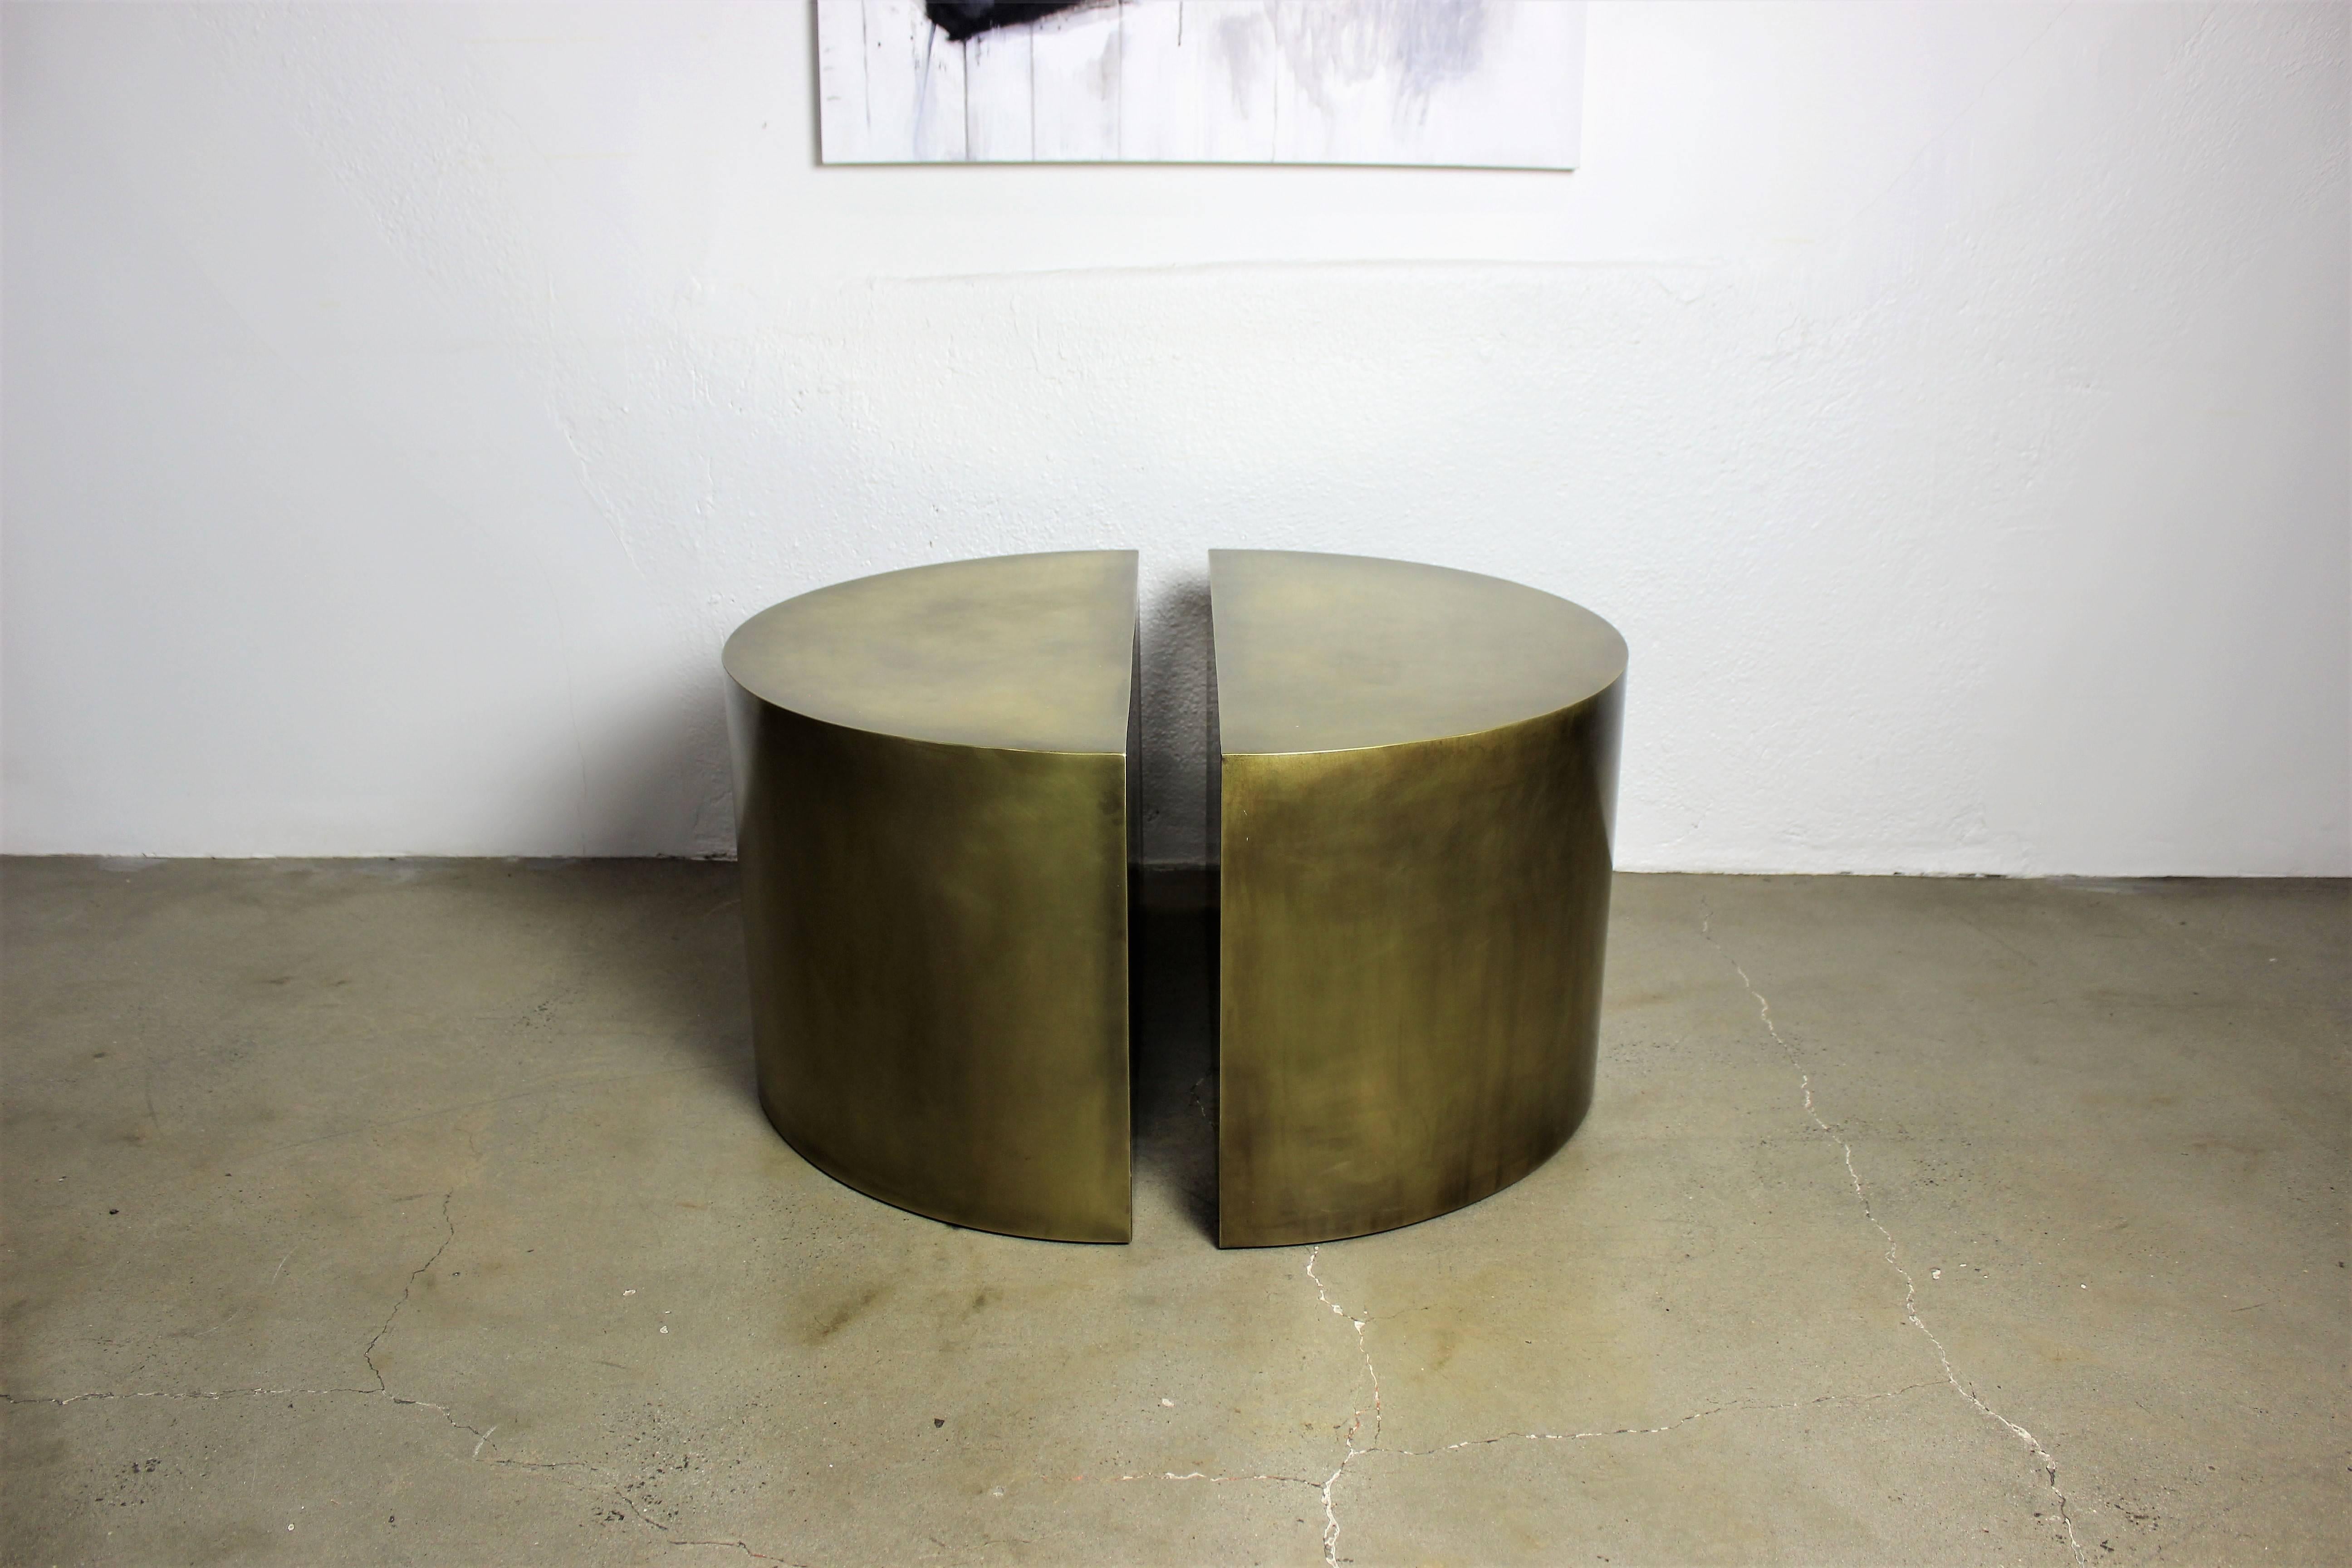 Hollywood Regency Solid Brass Geometric Demilune Side Tables with Heavy Patina, a pair